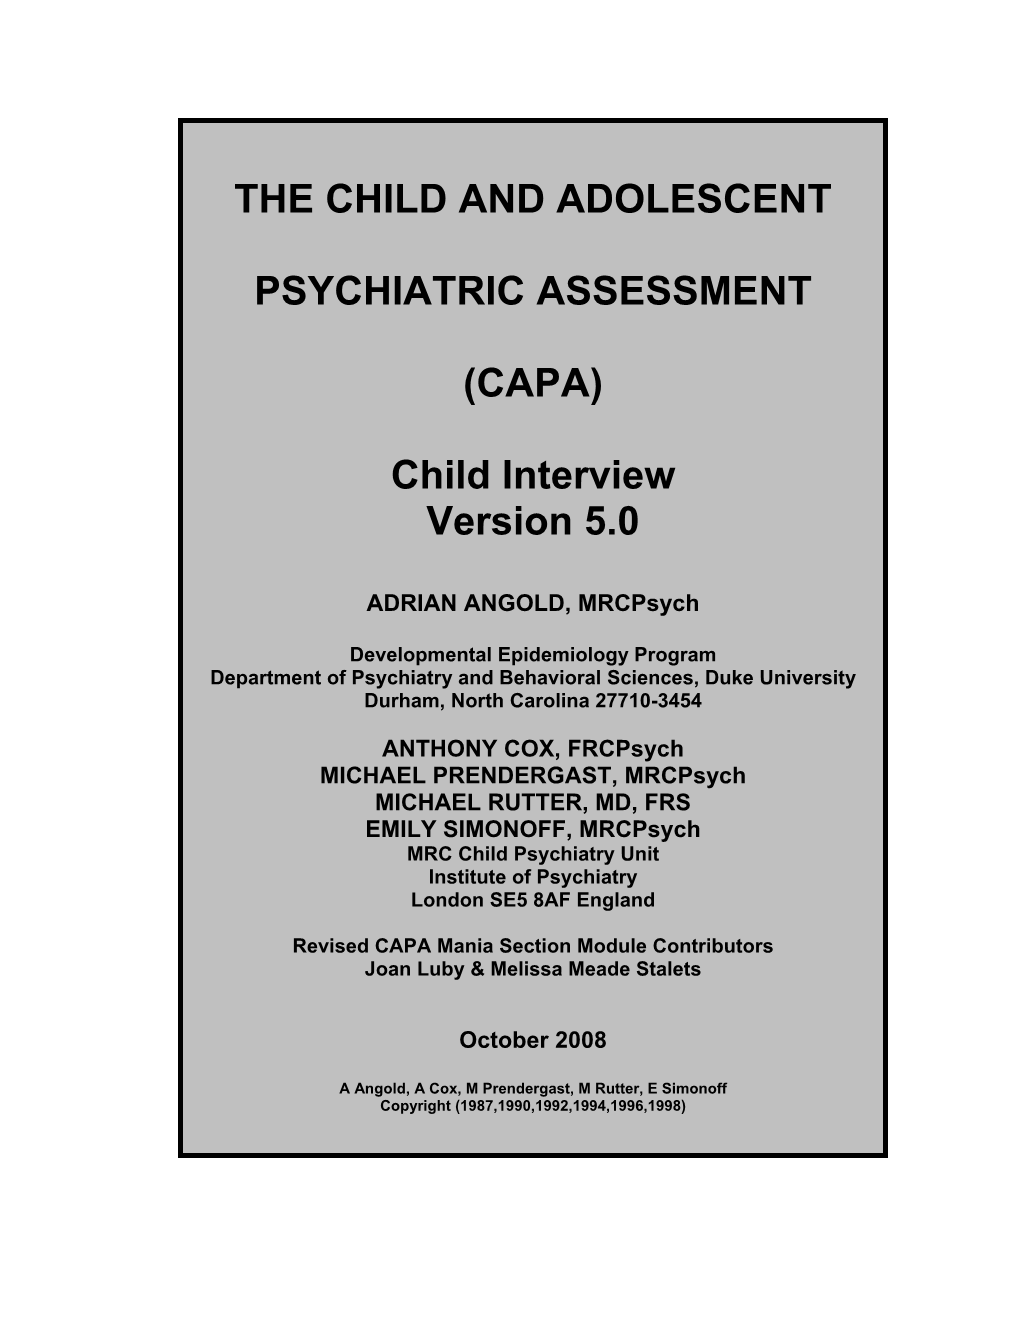 The Child and Adolescent Psychiatric Assessment